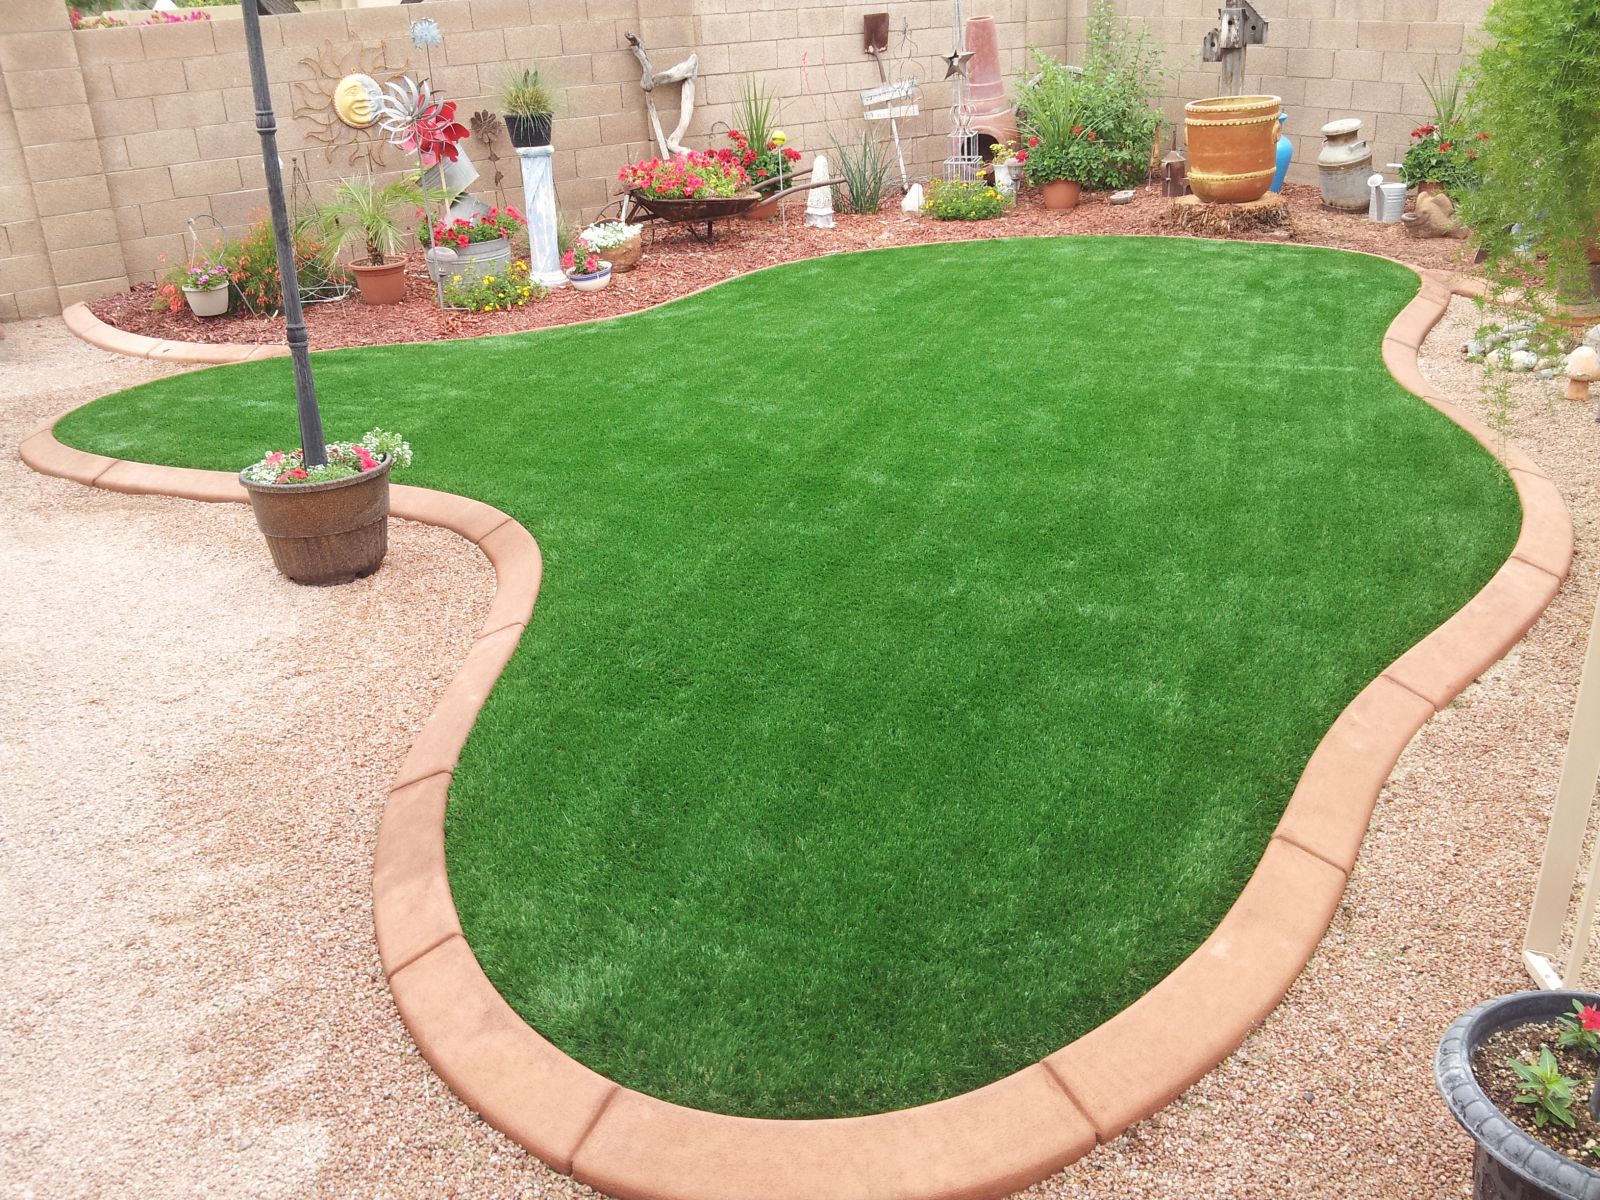 Tempe Artificial Grass. Fix Drainage Issues With Fake Grass